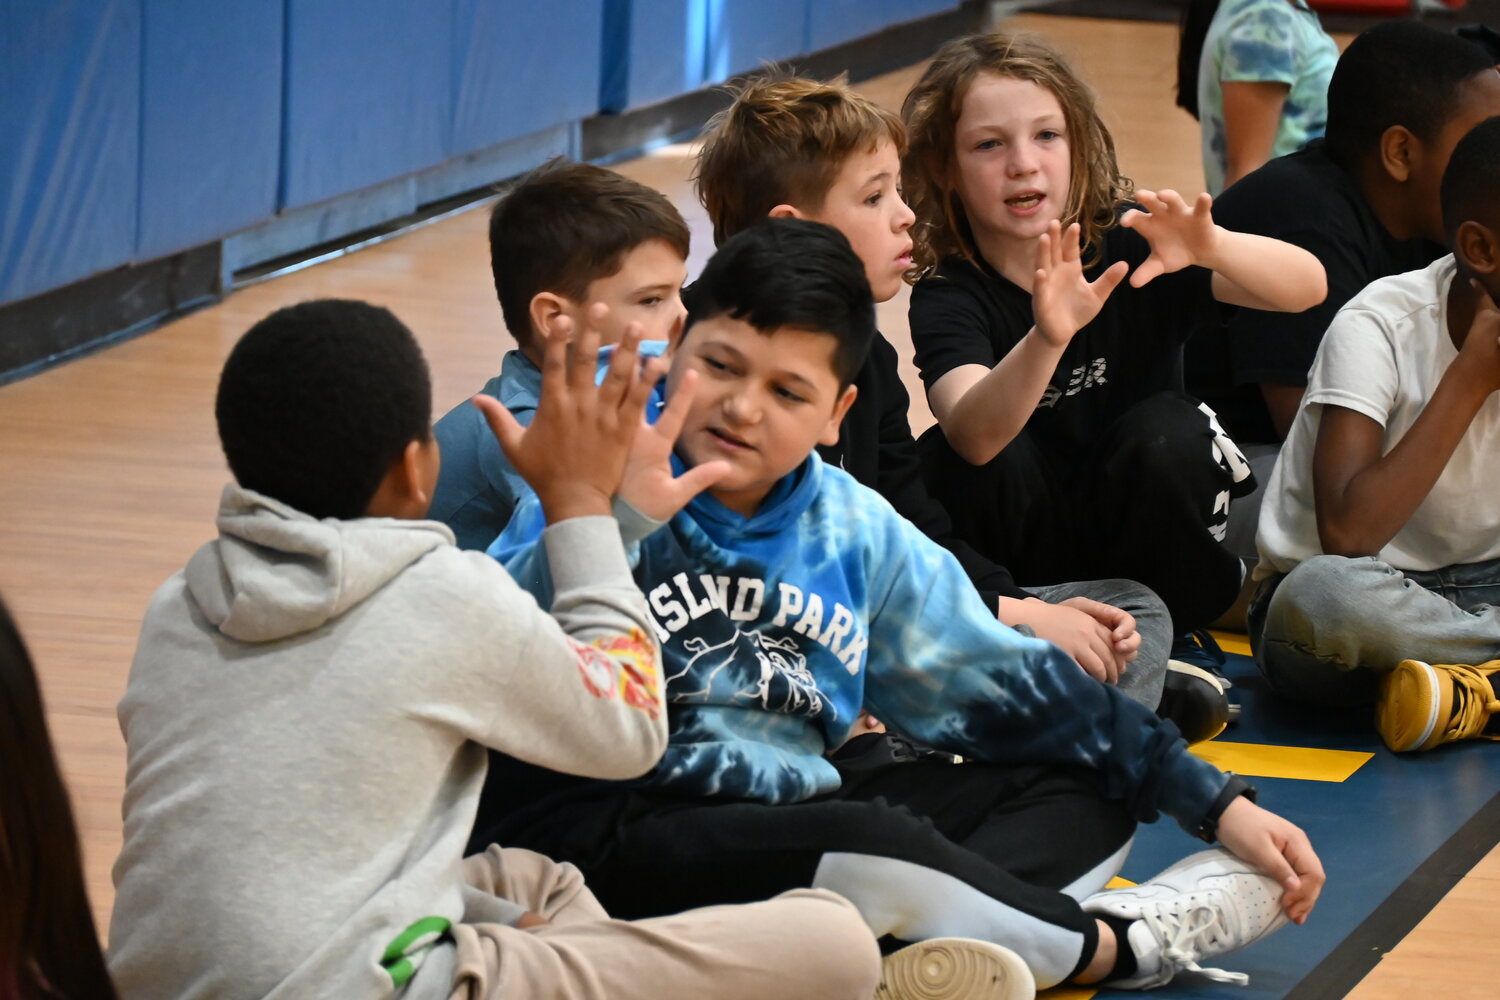 Fifth graders at Lincoln Orens Middle School enjoyed The Reaction Game focused on listening skills.